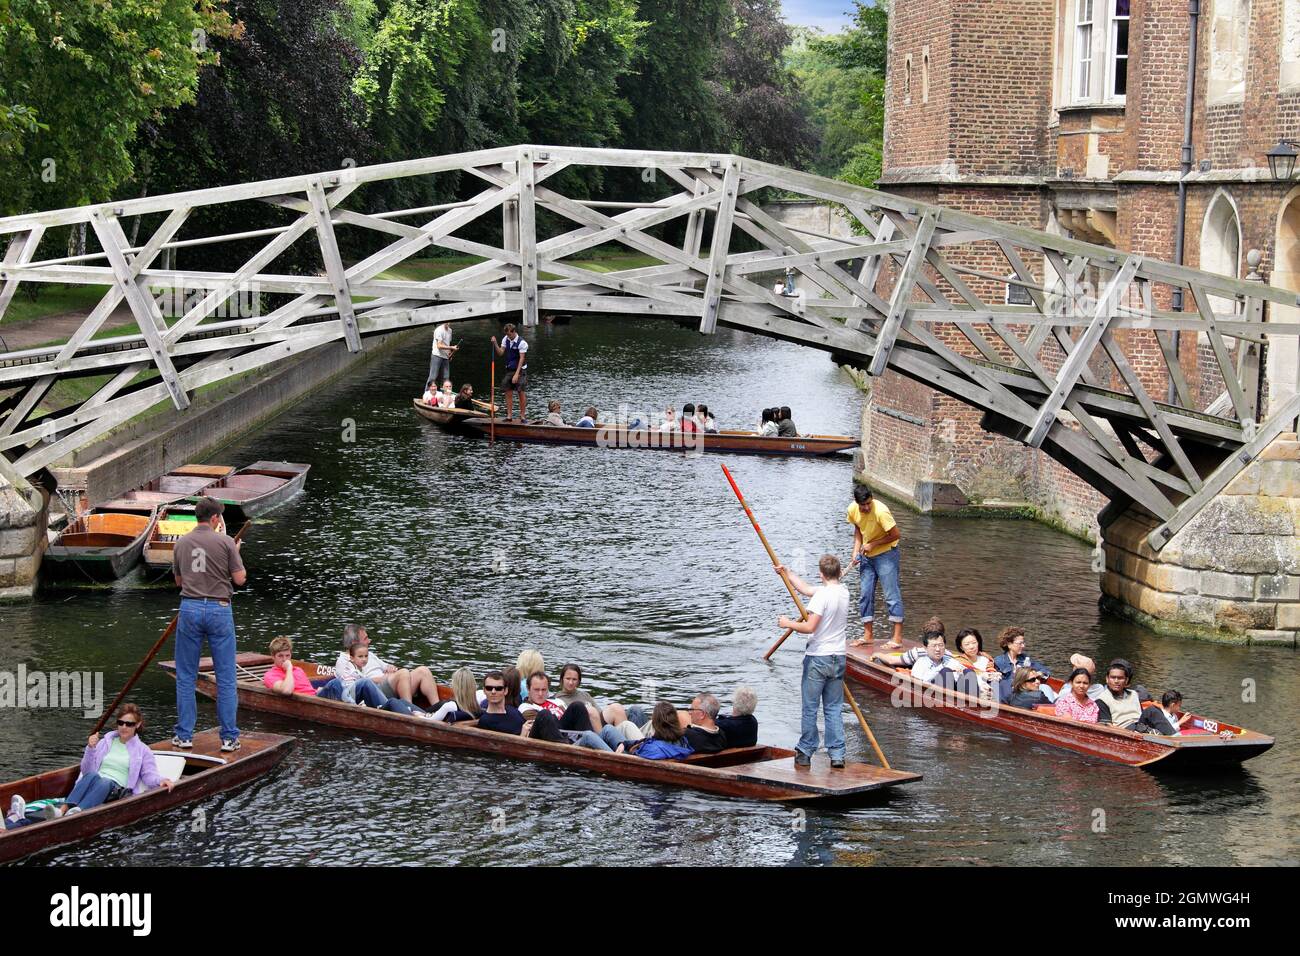 Punting on the Cam - under Mathematics Bridge, Queen's College Cambridge 2 Cambridge, Cambridgeshire - 20 July 2009; Group of people in view, having f Stock Photo